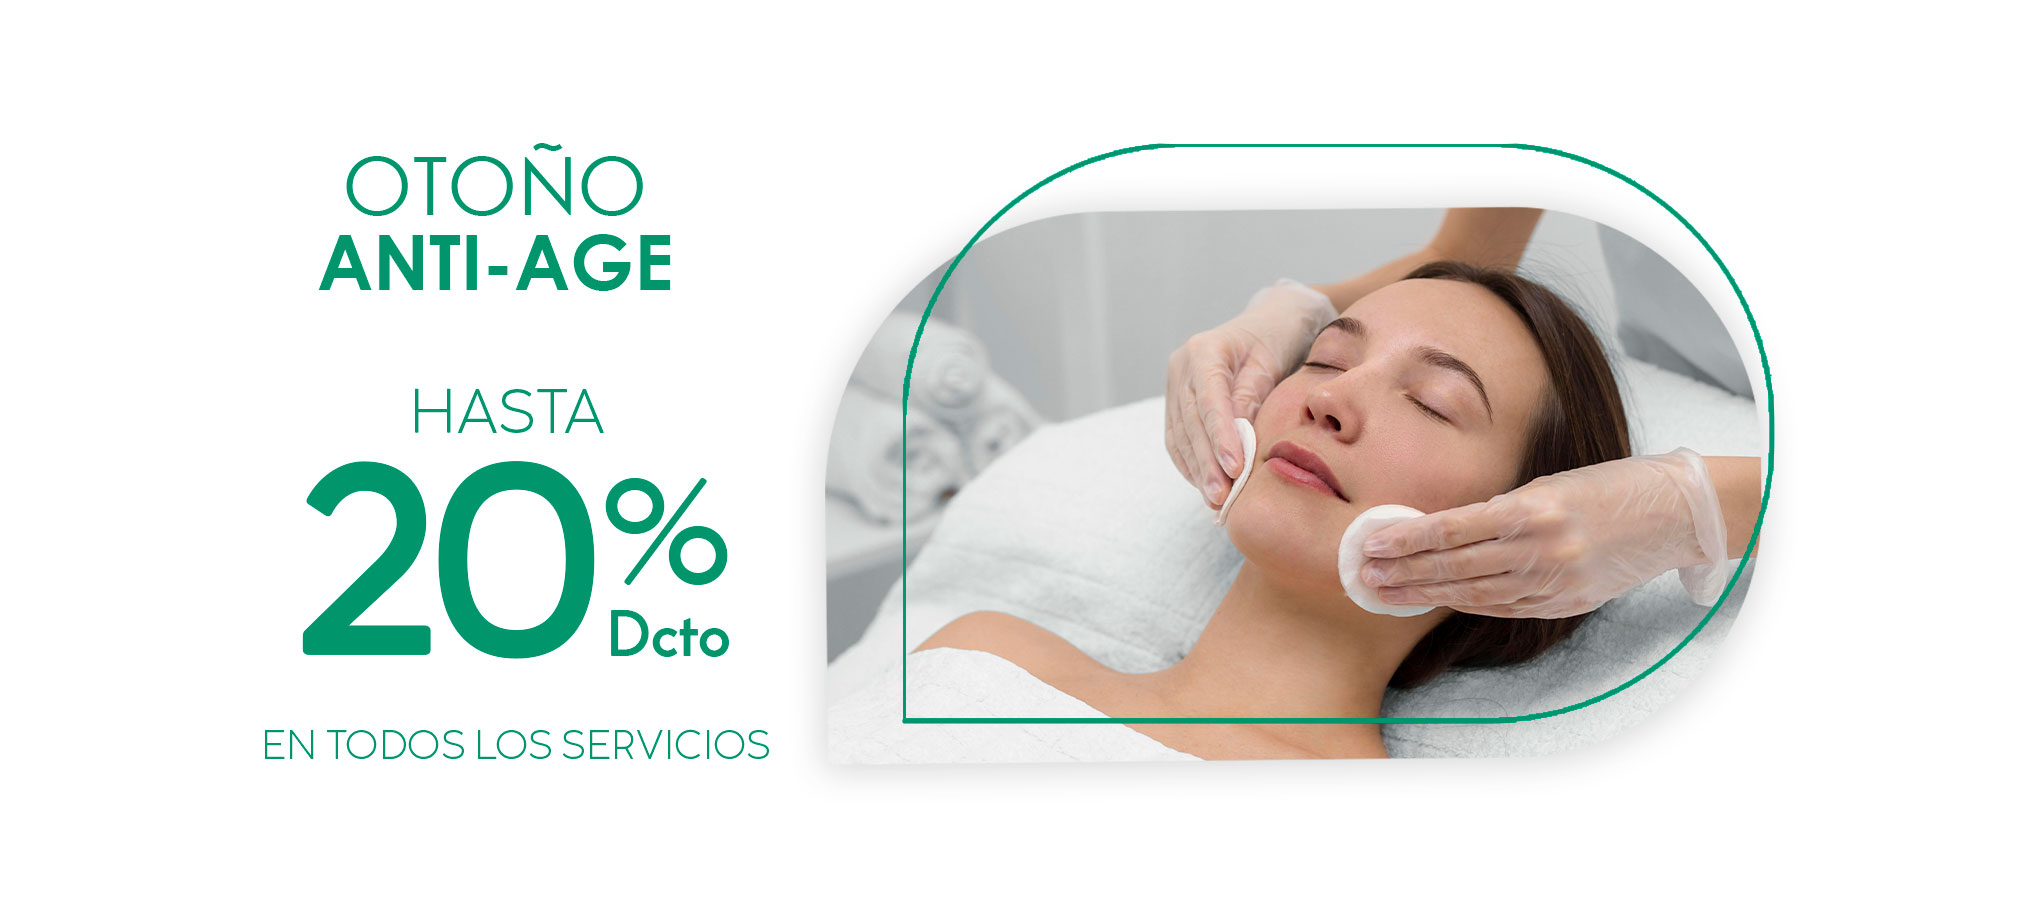 ofertas otoño antiage aesthetic place dr roy sothers